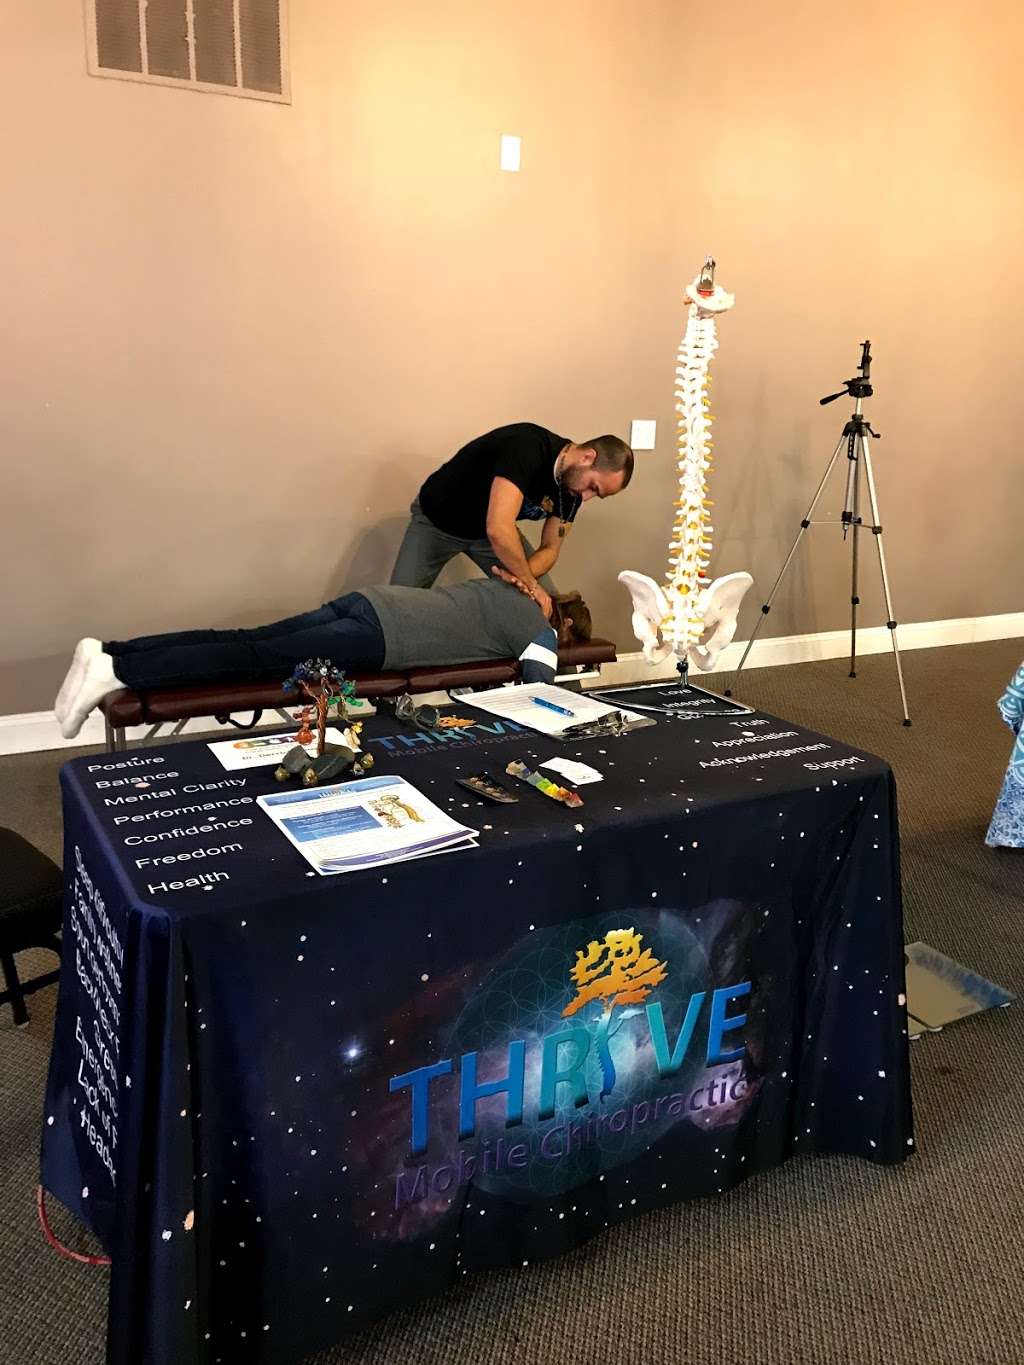 Thrive mobile chiropractic | 36485 N Maple Ave, Ingleside, IL 60041, USA | Phone: (224) 323-9578